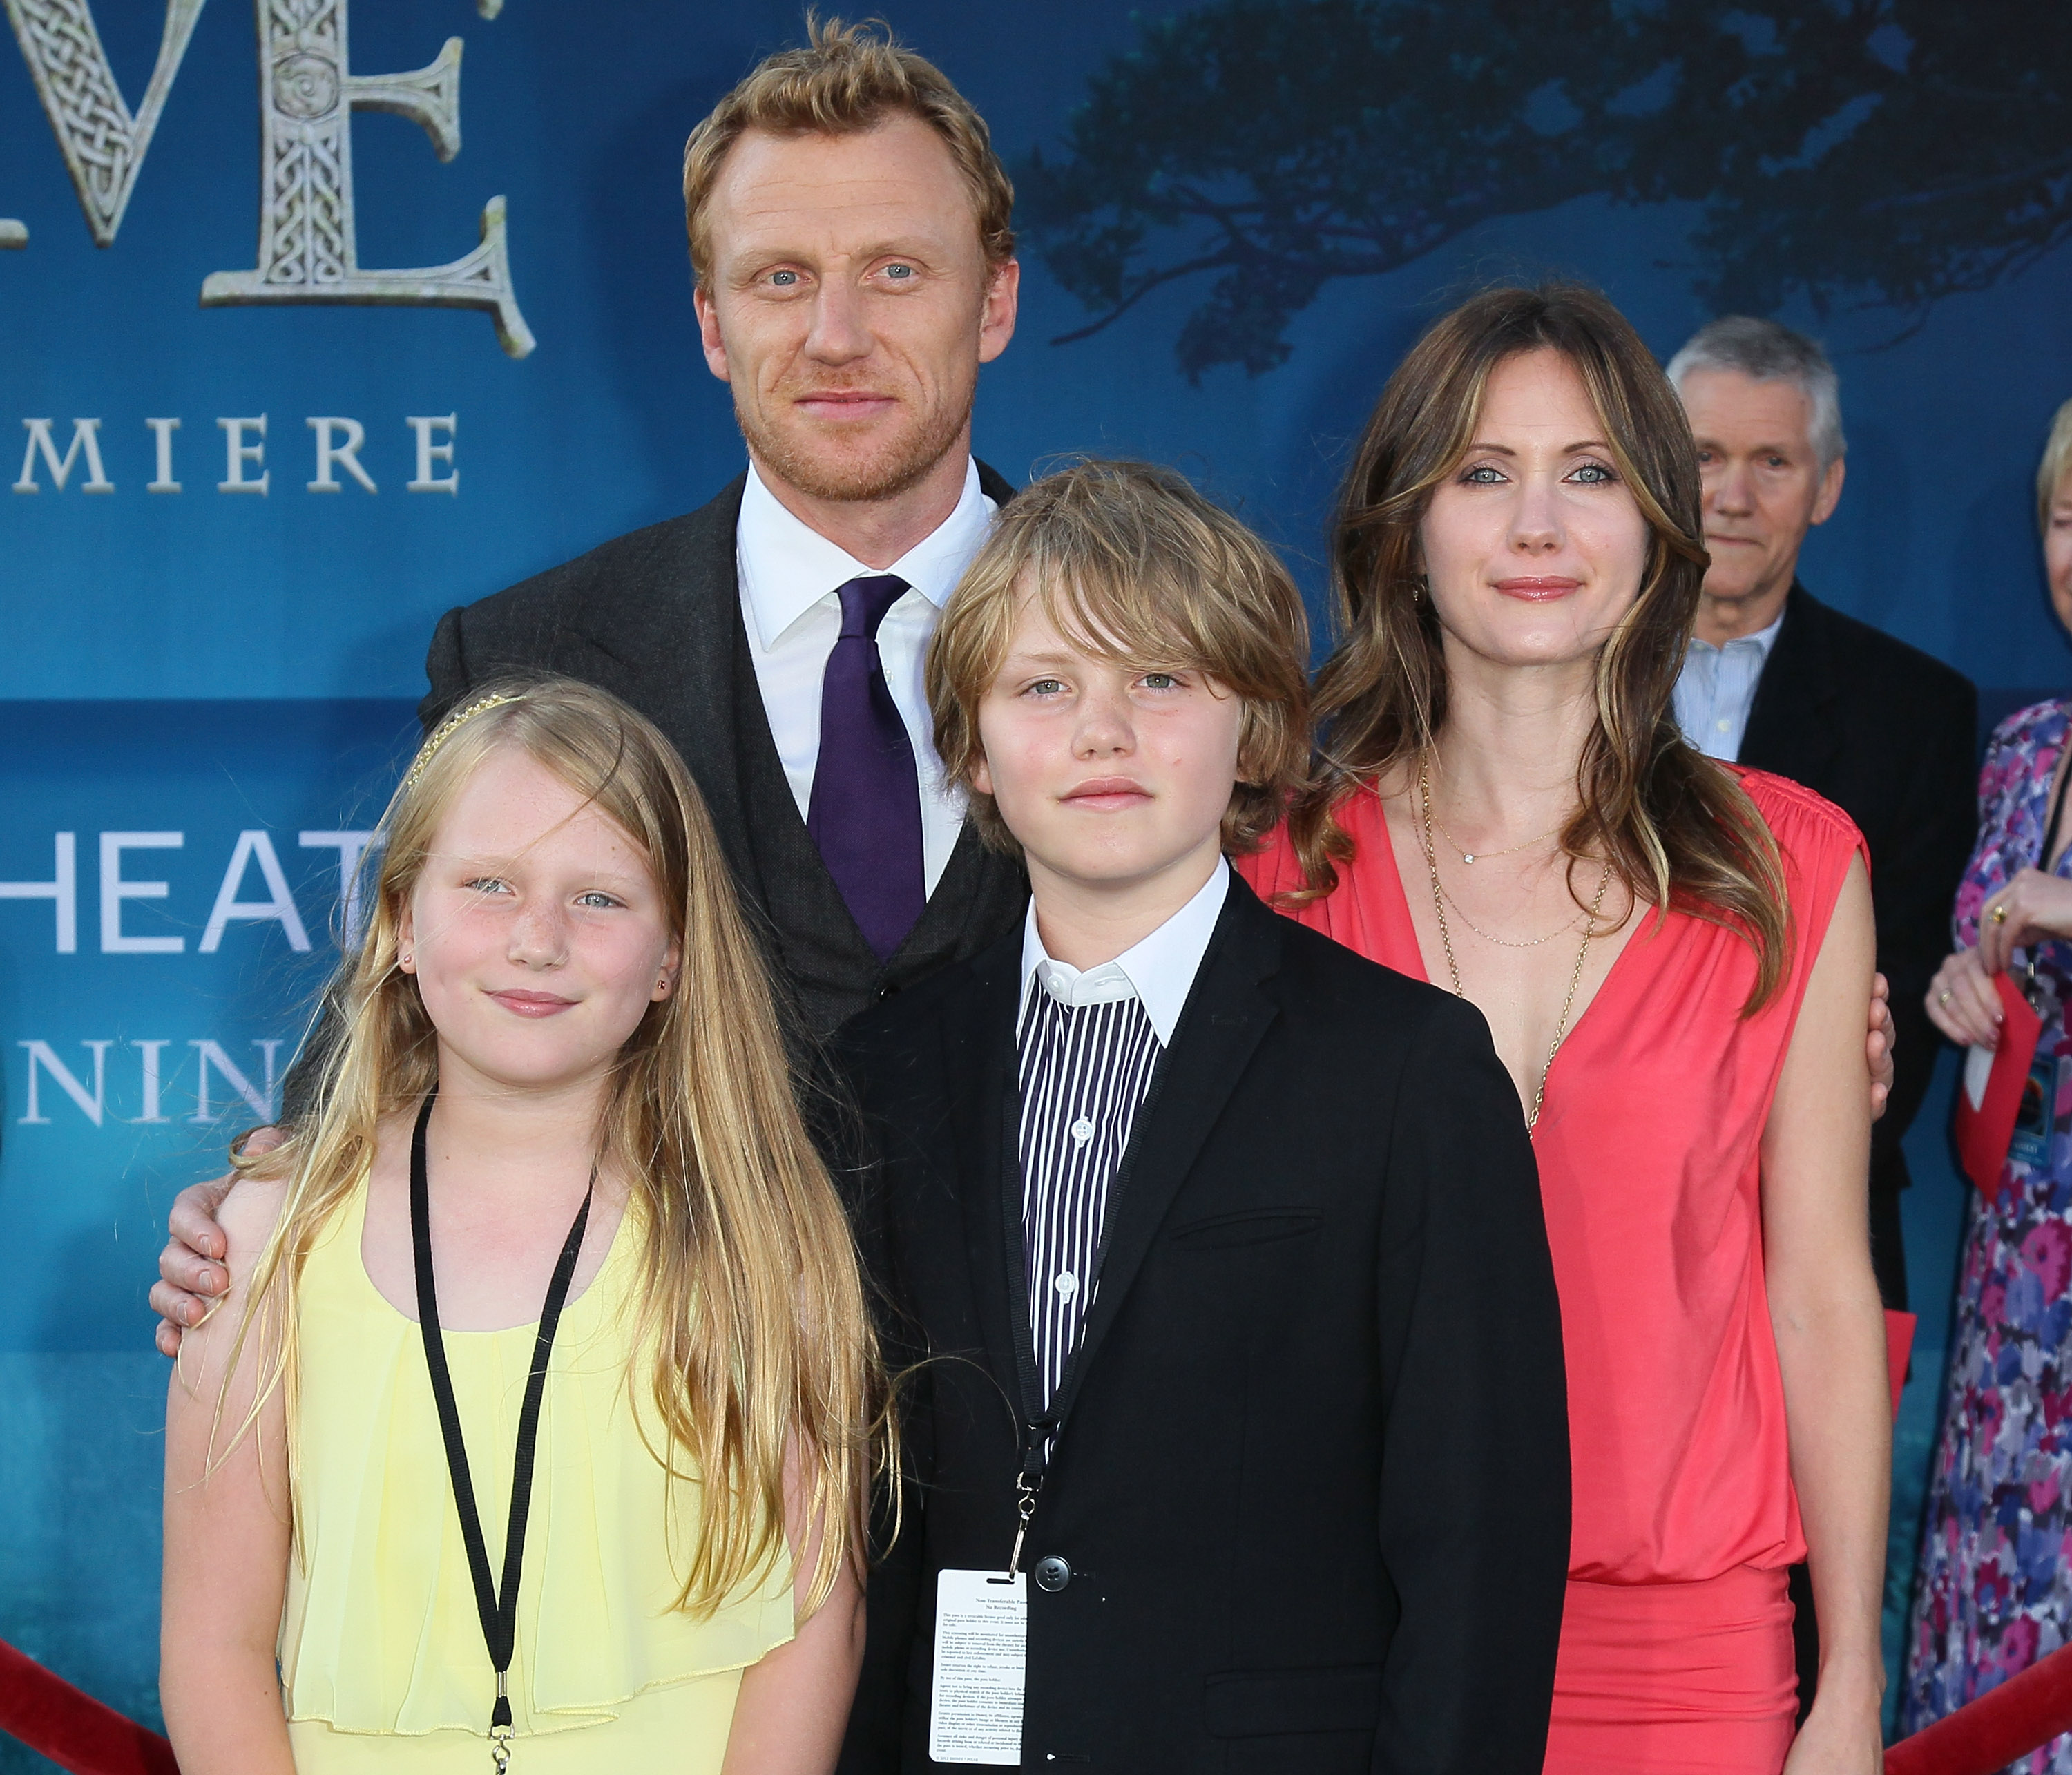 Actor Kevin McKidd, wife Jane Parker and children attend Film Independent's 2012 Los Angeles Film Festival premiere of Disney Pixar's "Brave" at the Dolby Theatre, on June 18, 2012, in Hollywood, California. | Source: Getty Images